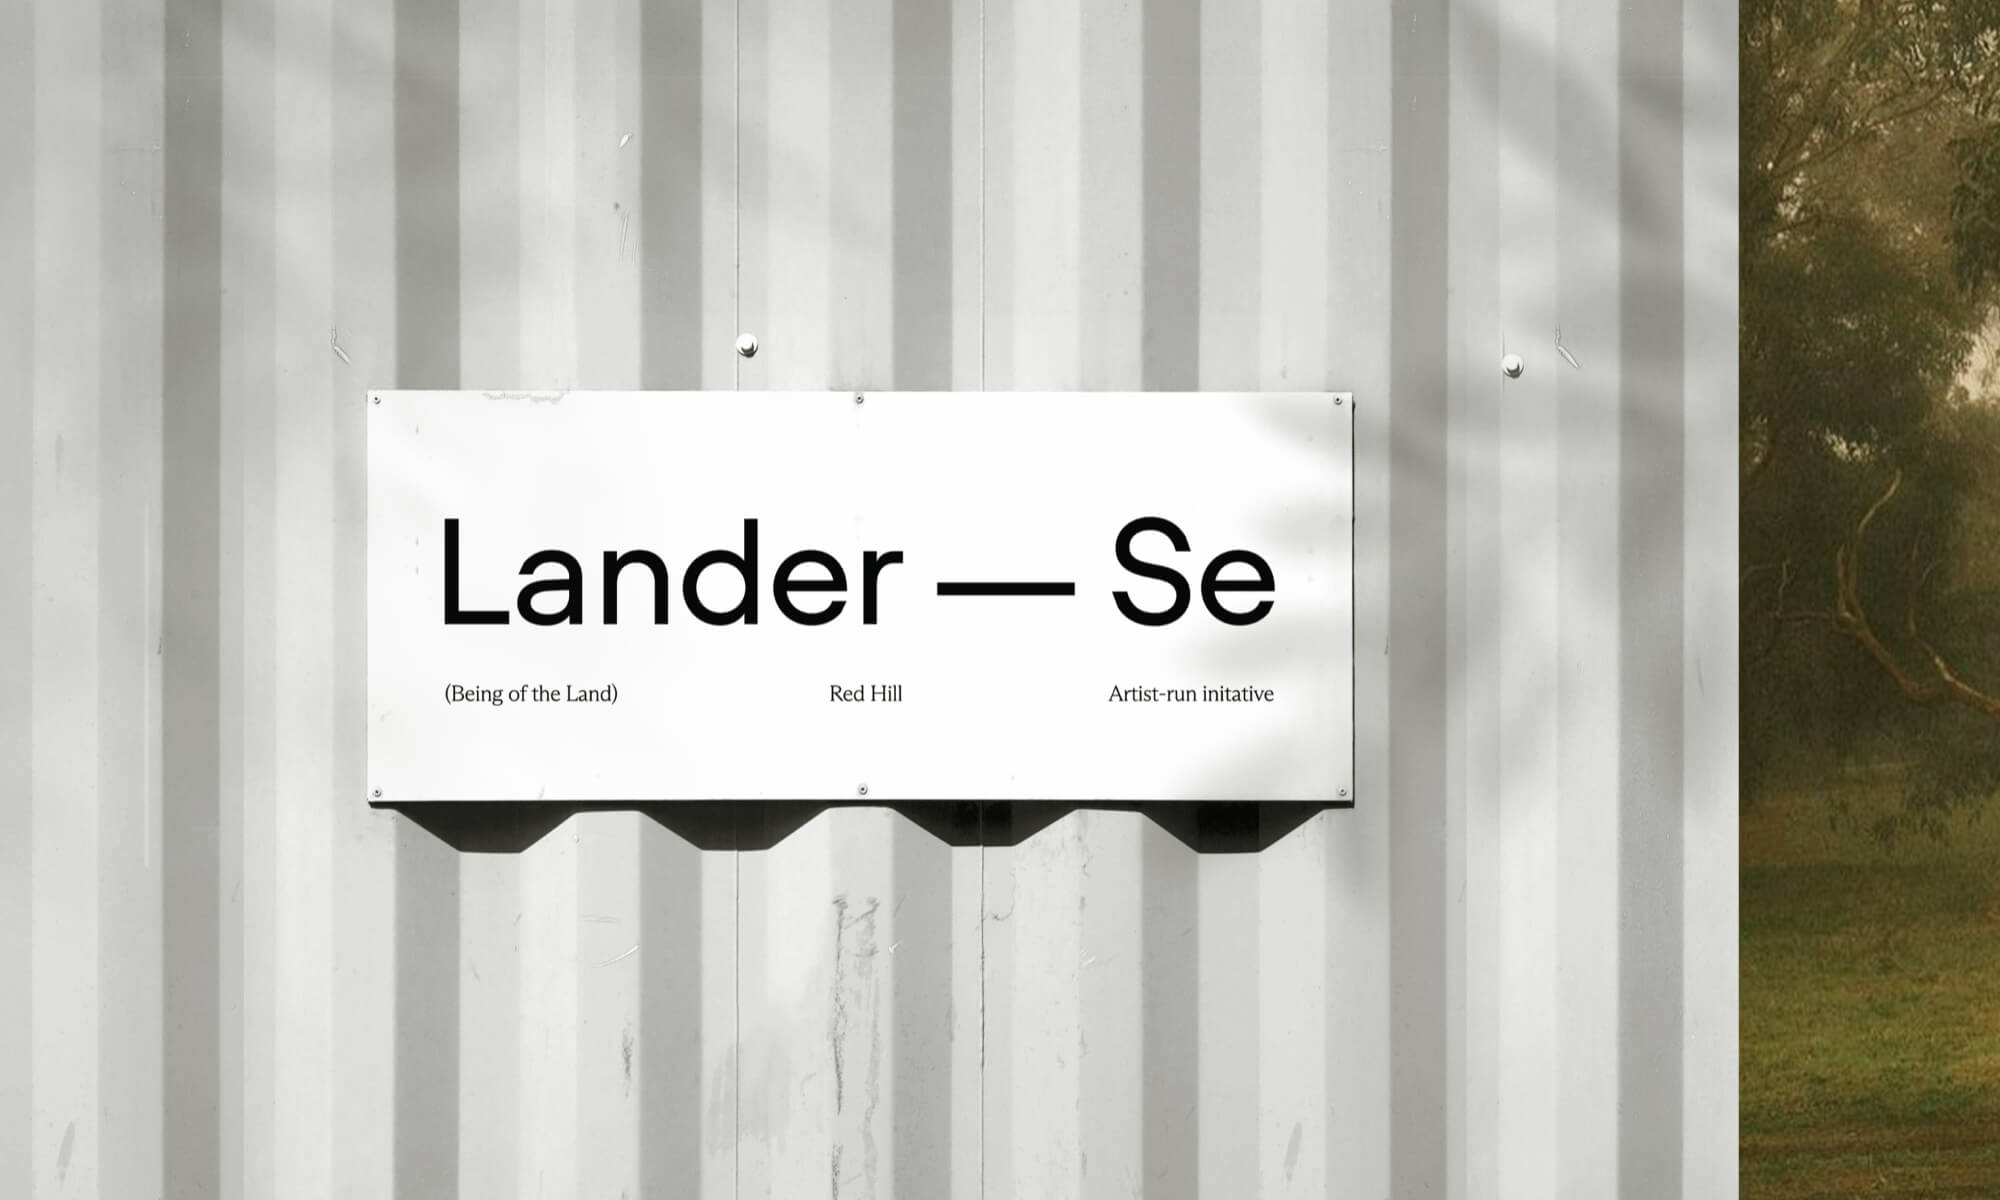 wall signage for the Lander Se art space located in Red Hill victoria